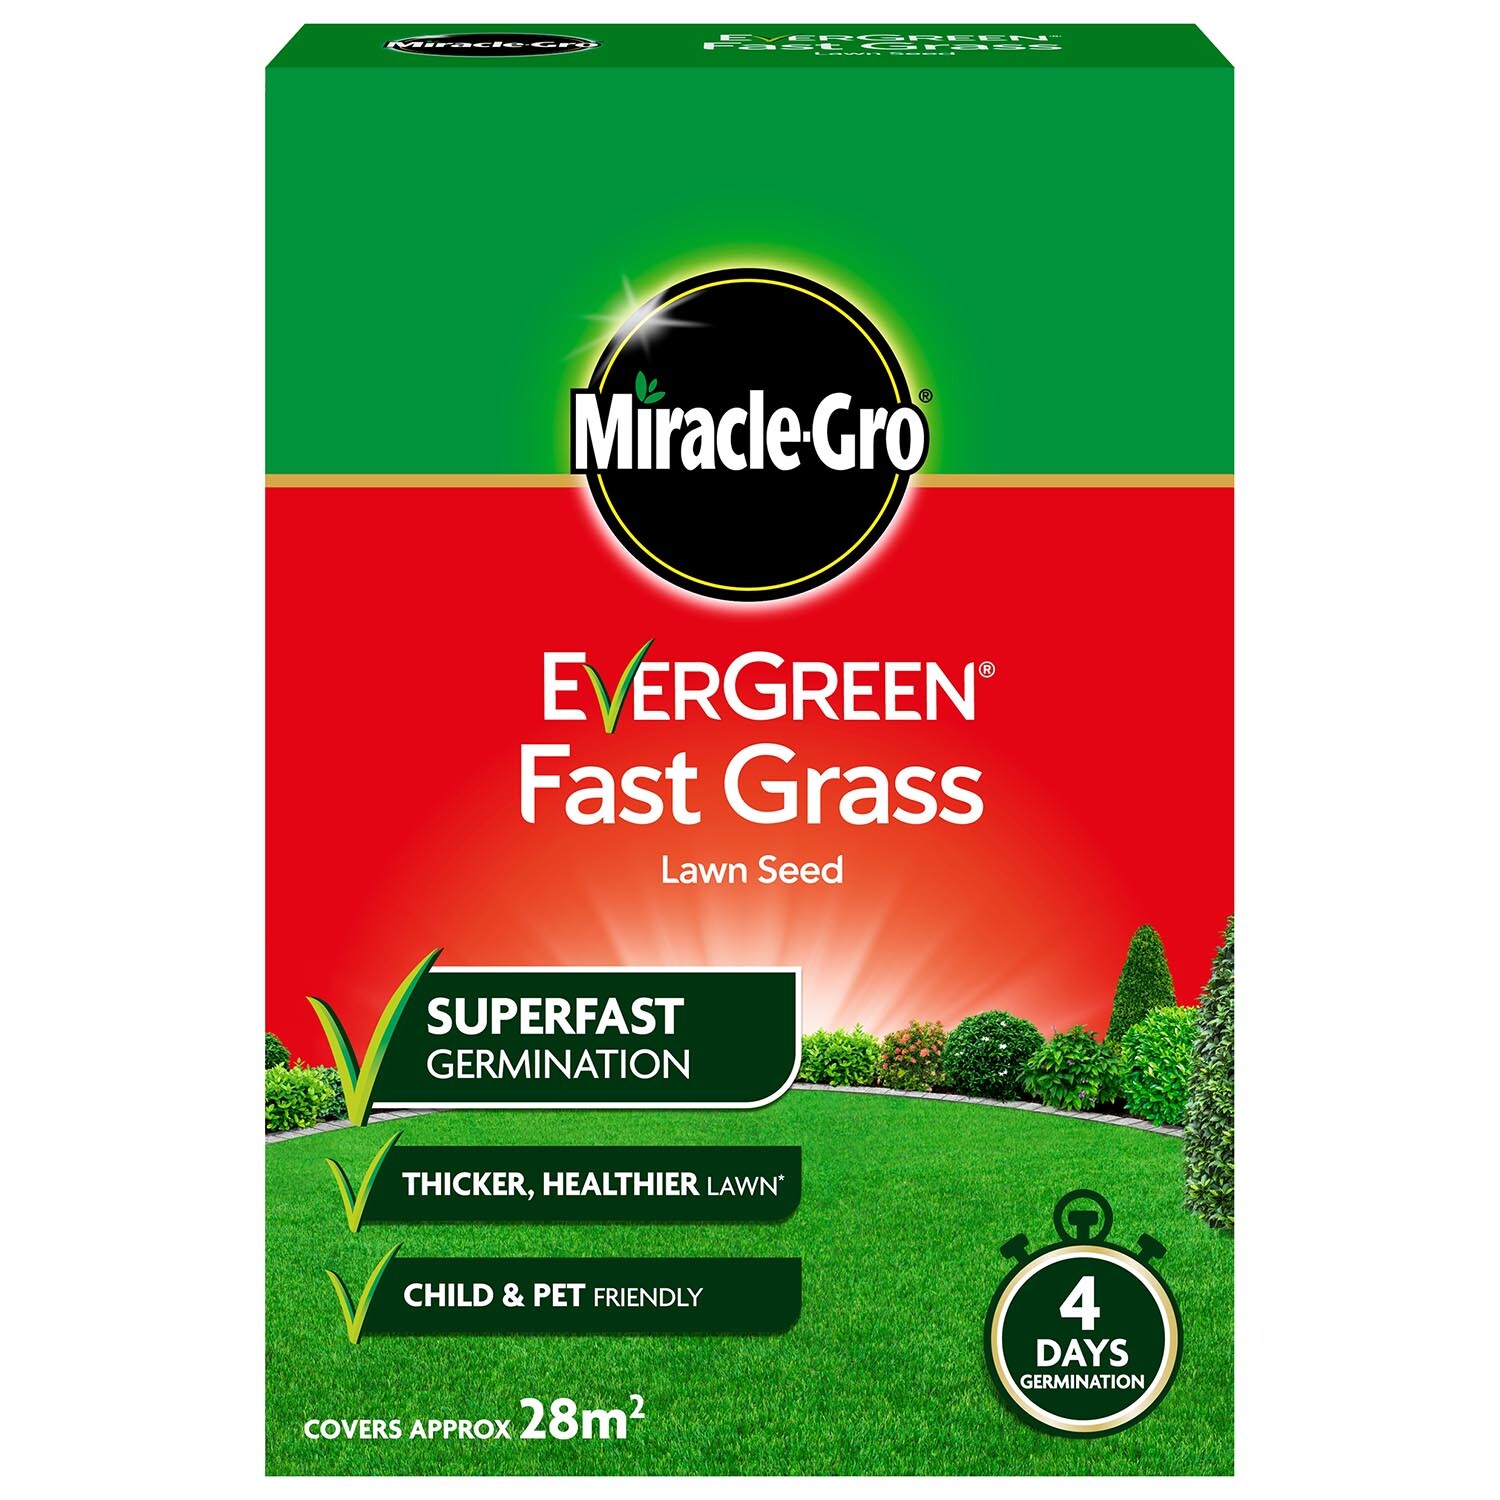 Miracle-Gro Evergreen Fast Grass Lawn Seed Image 1